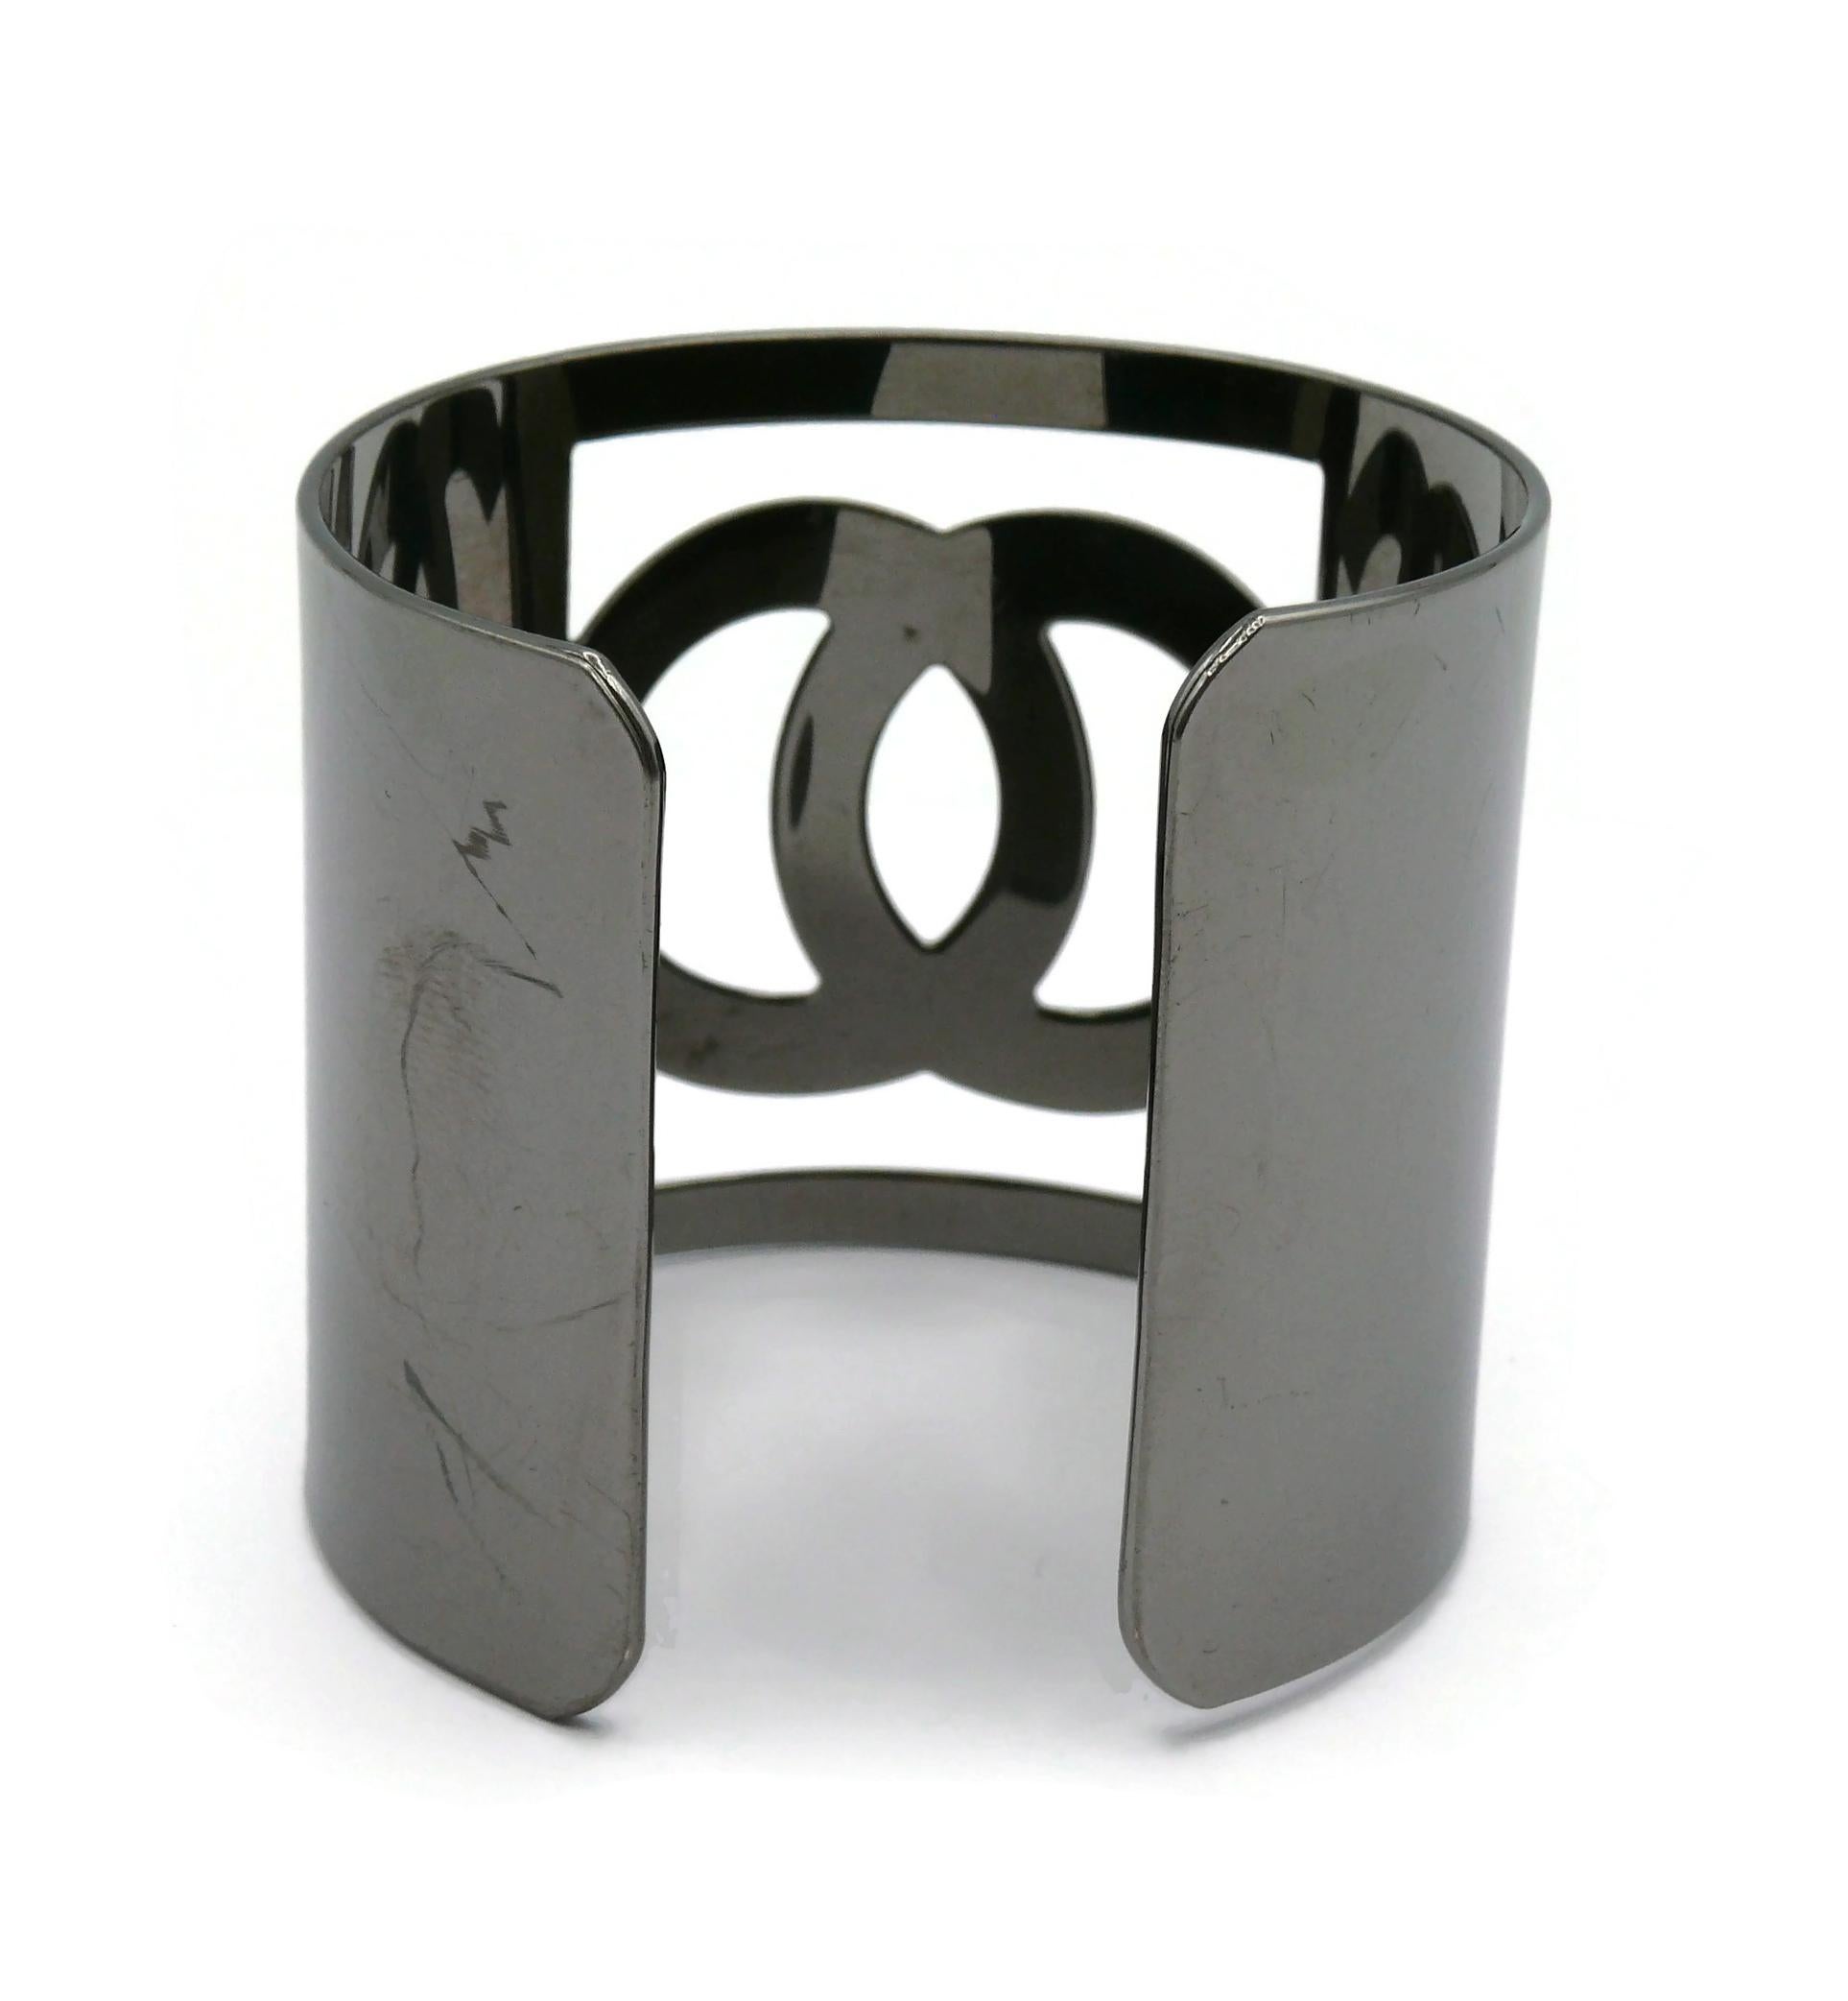 CHANEL by KARL LAGERFELD Cut-Out CC Logo Ruthenium Cuff Bracelet, Autumn 2006 In Good Condition For Sale In Nice, FR